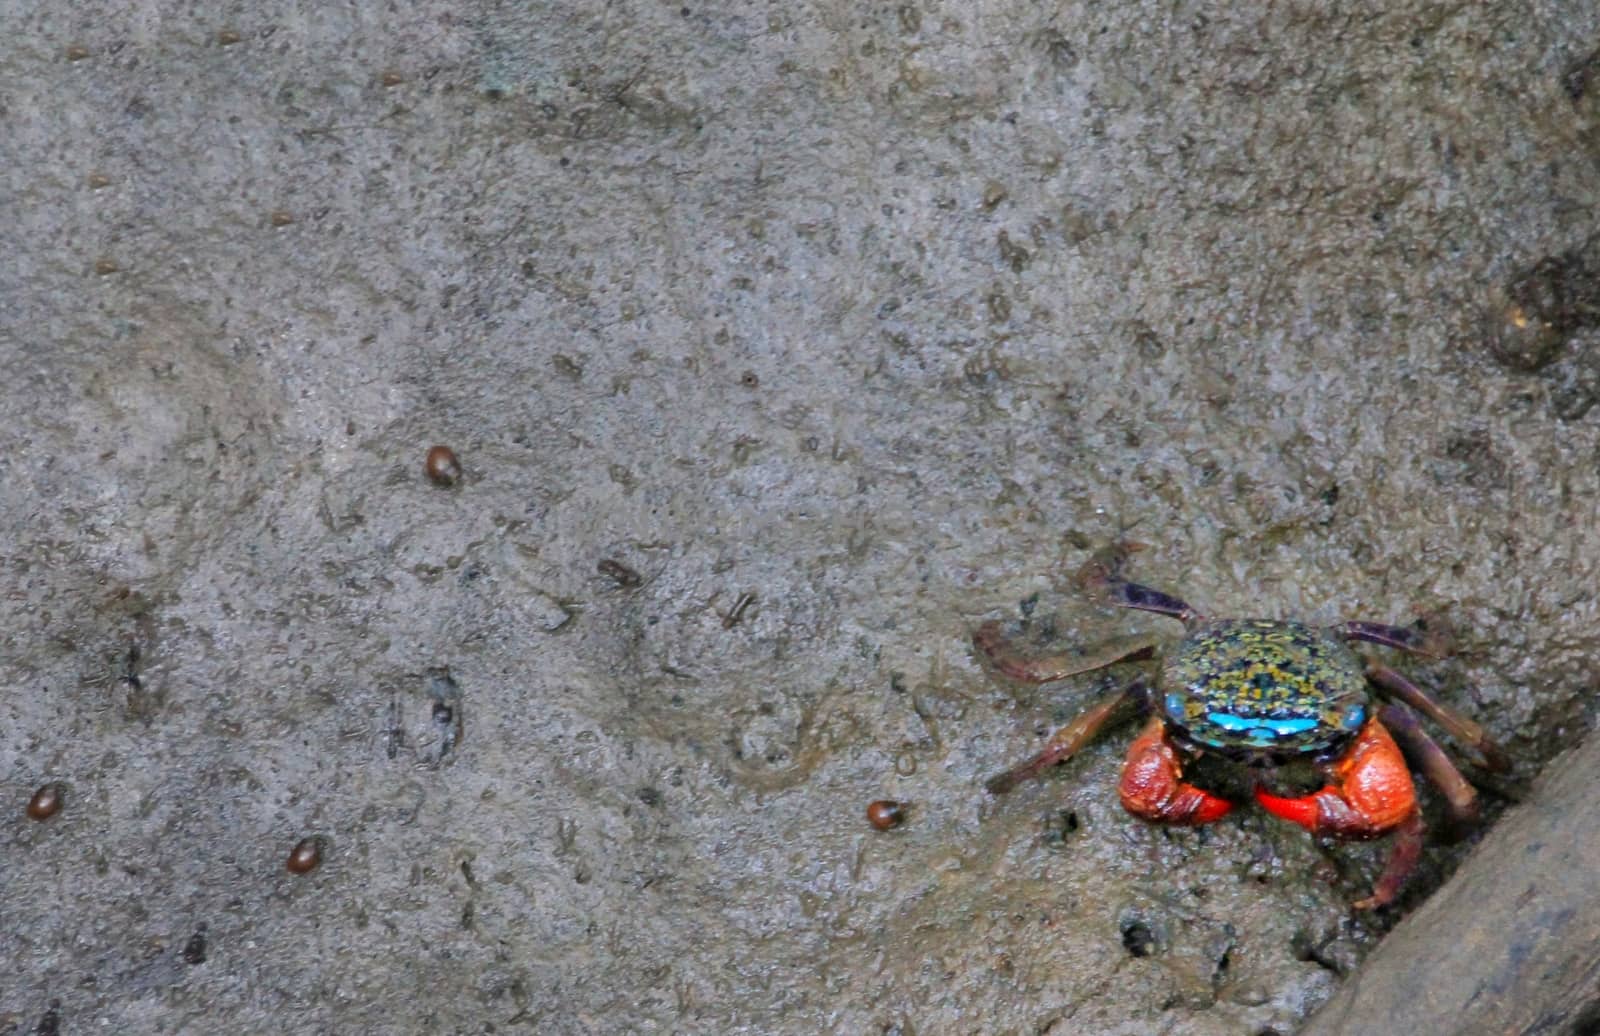 Uca tetragonon, a species of fiddler crab commonly found in mangrove areas